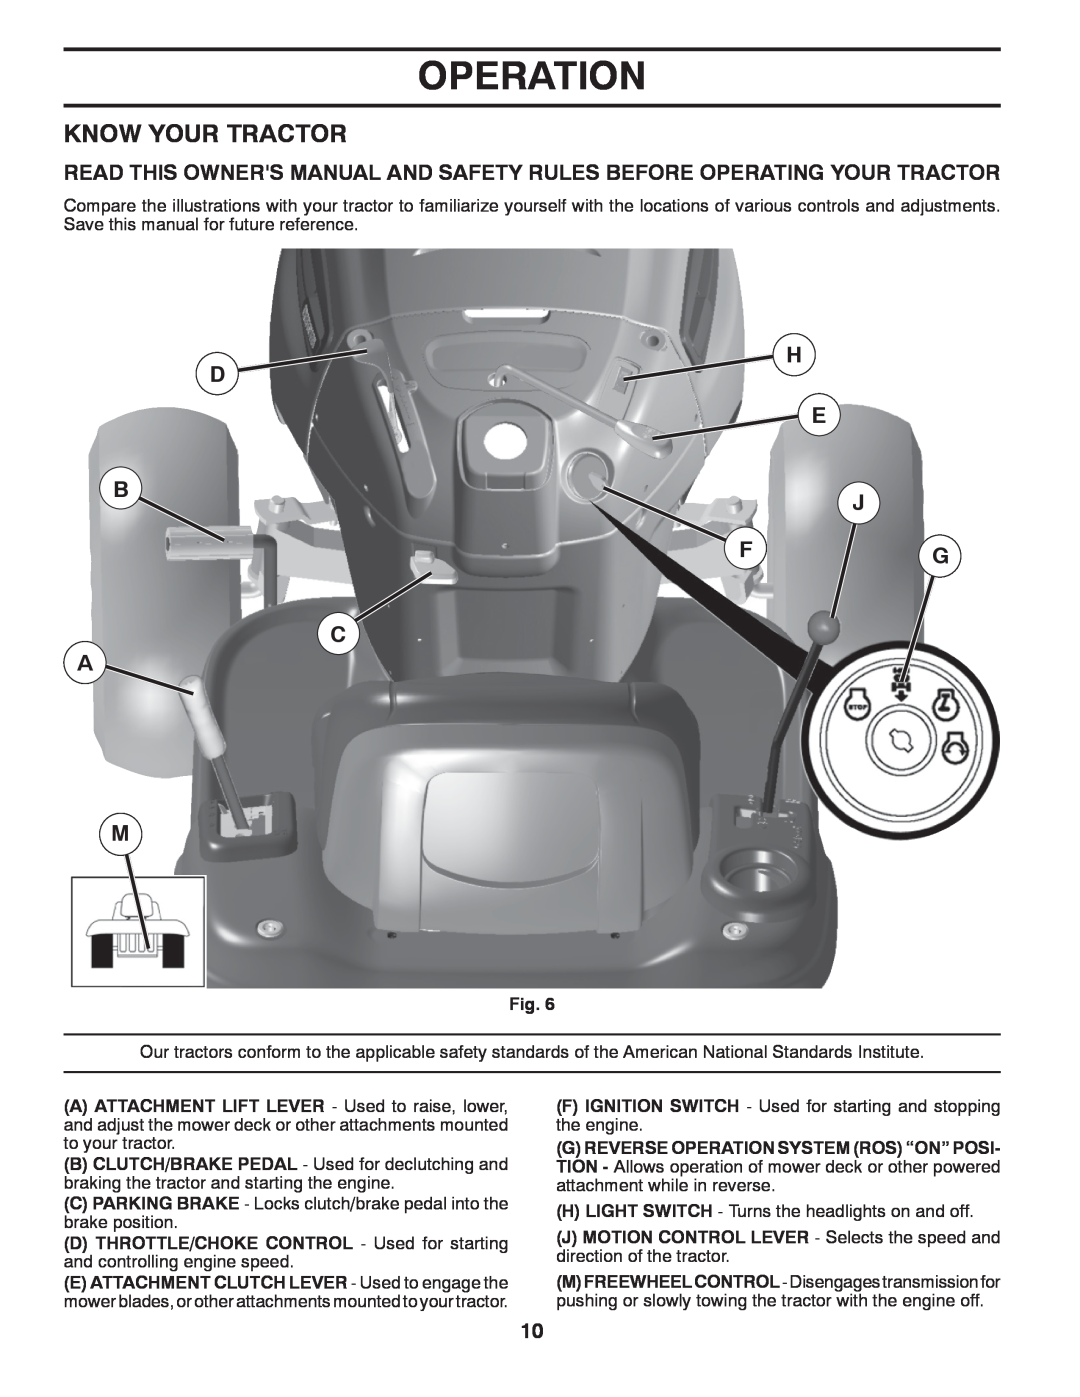 Husqvarna LTH1438 owner manual Know Your Tractor, Operation 